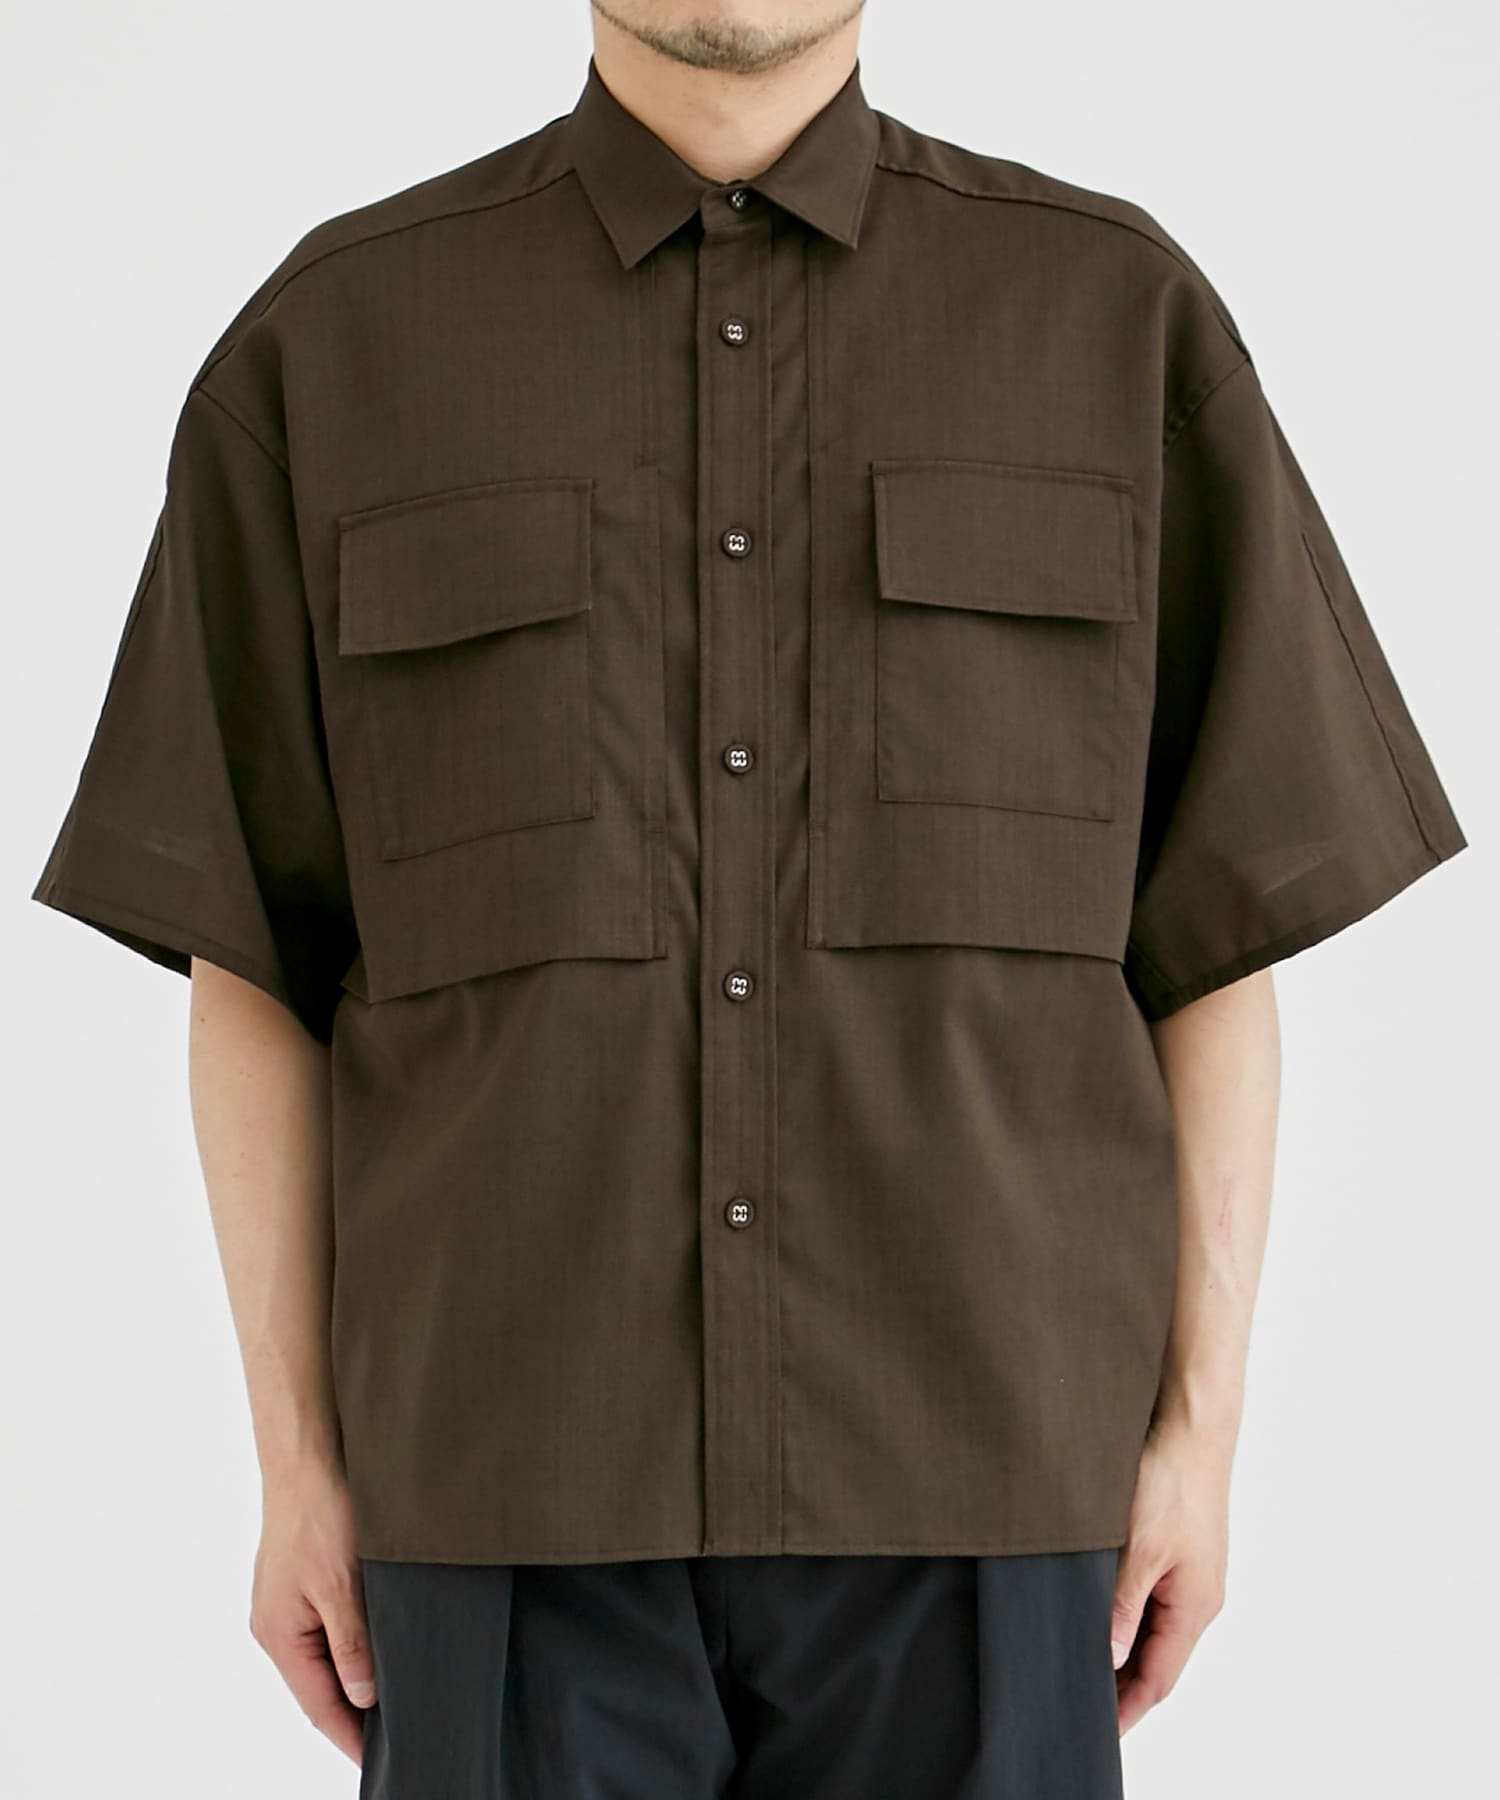 SOLOTEX WIDE S/S SHIRT White Mountaineering